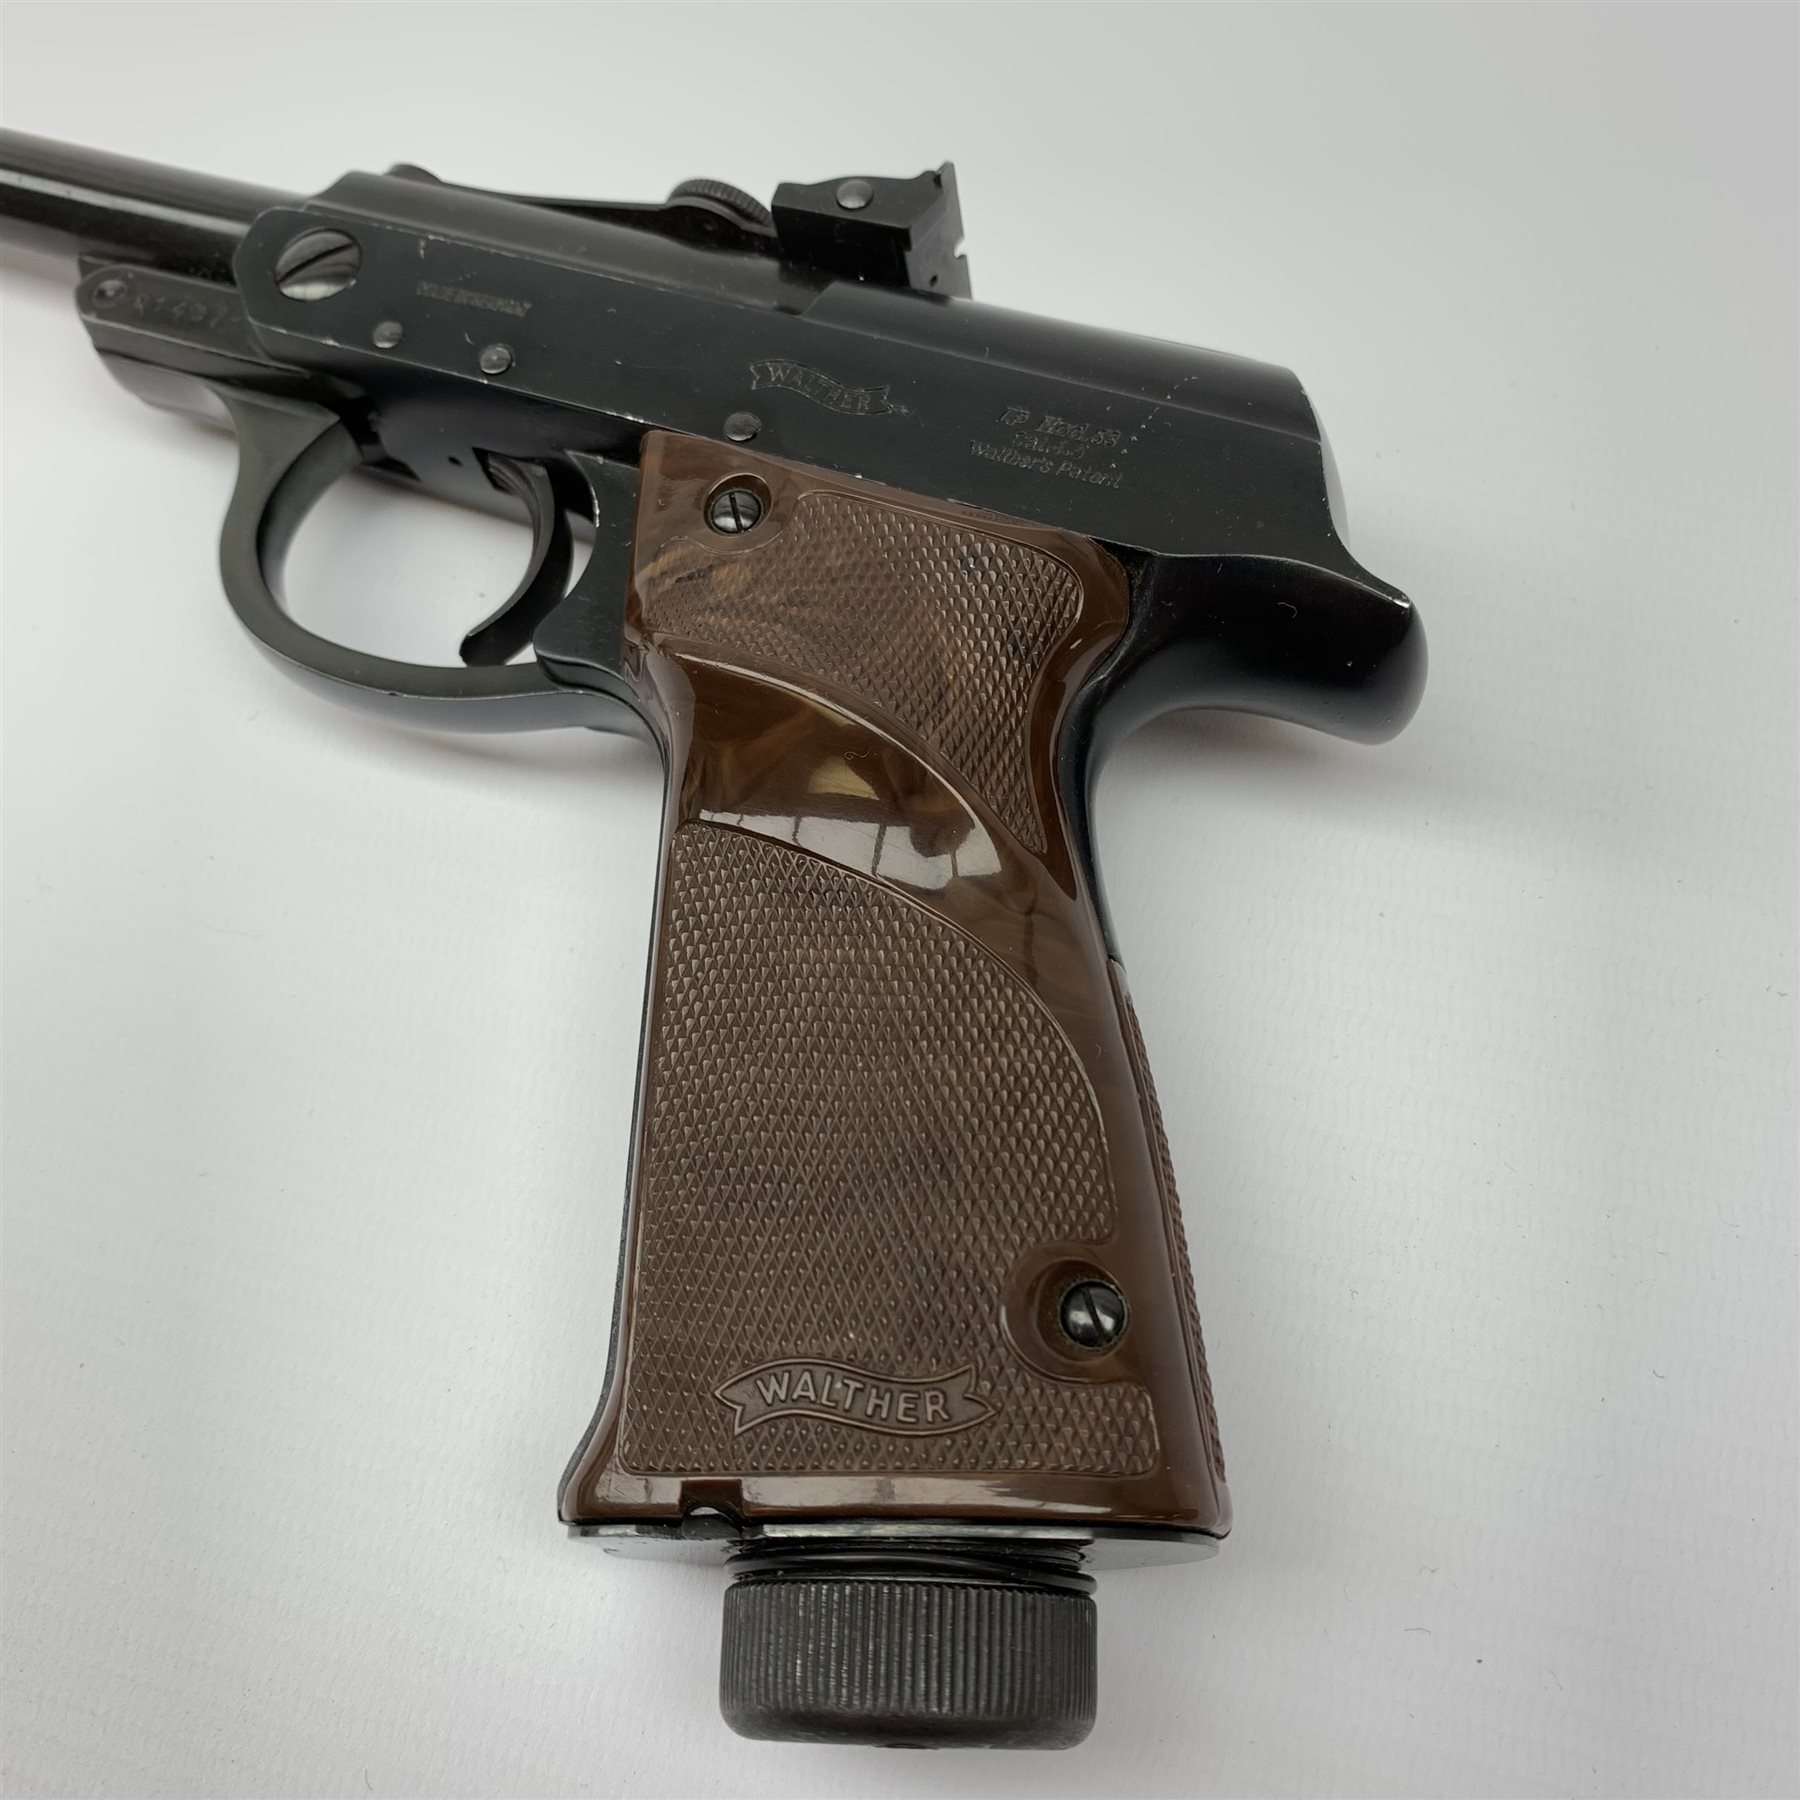 Walther .177 CO2 powered air pistol model LP53 with John Walker ...